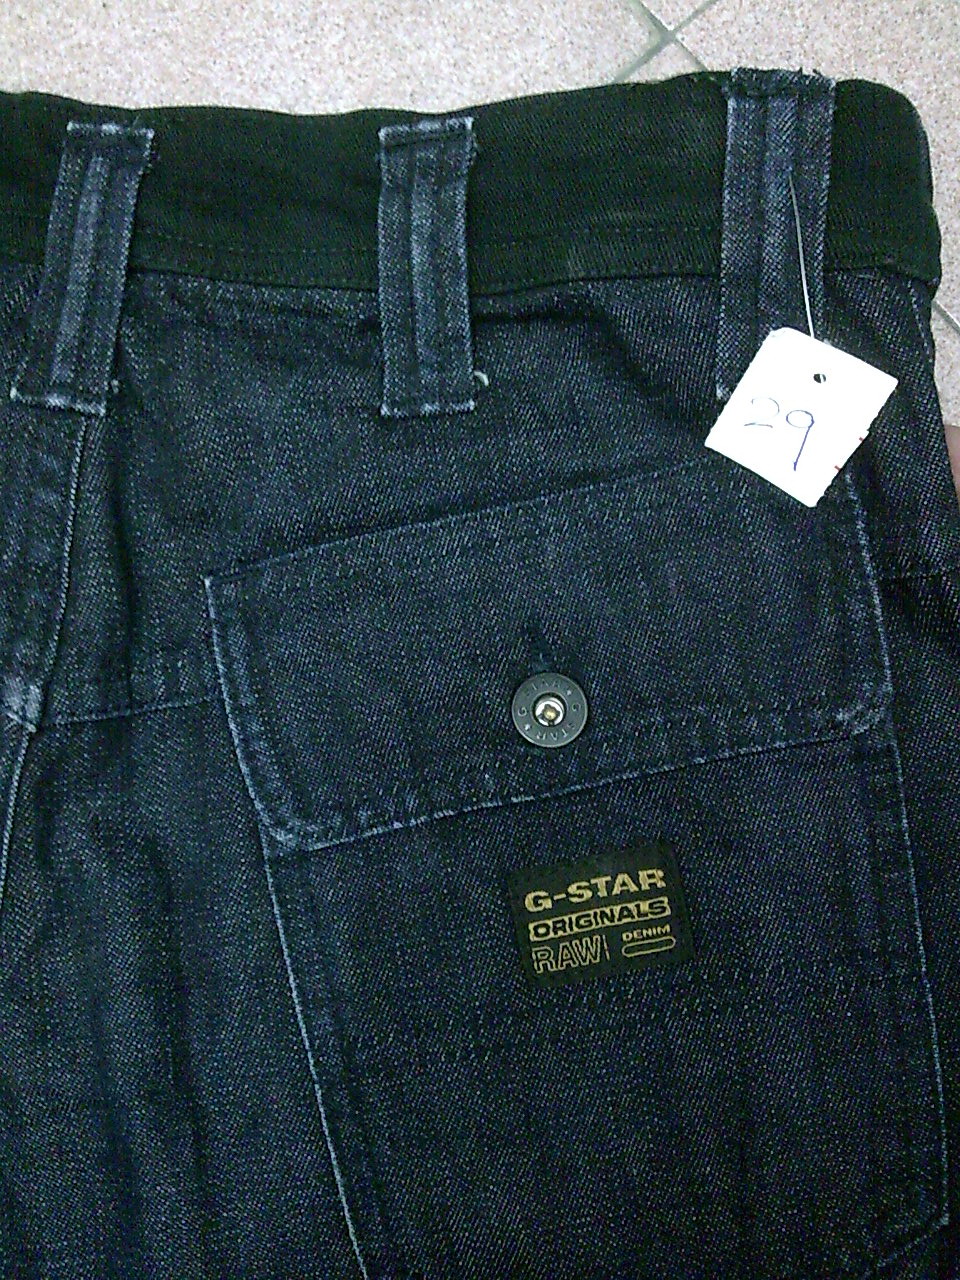 G-STAR COMWOOD SIZE 29 (SOLD) ~ different class bundle